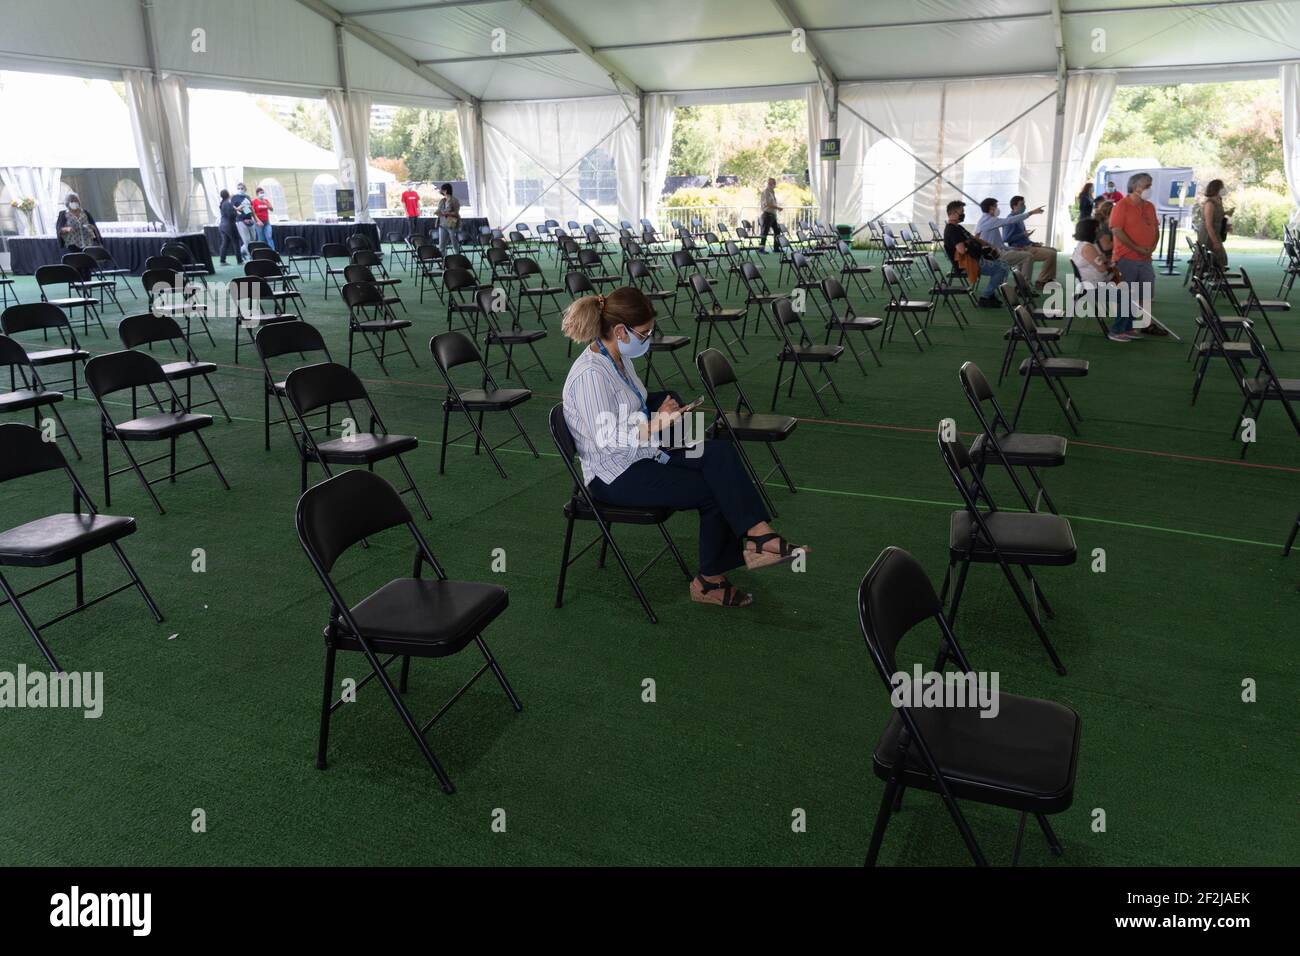 Santiago, Metropolitana, Chile. 12th Mar, 2021. A woman waiting to be called to receive the Sinovac vaccine against the coronavirus, at a vaccination center installed in a park in Santiago. Credit: Matias Basualdo/ZUMA Wire/Alamy Live News Stock Photo